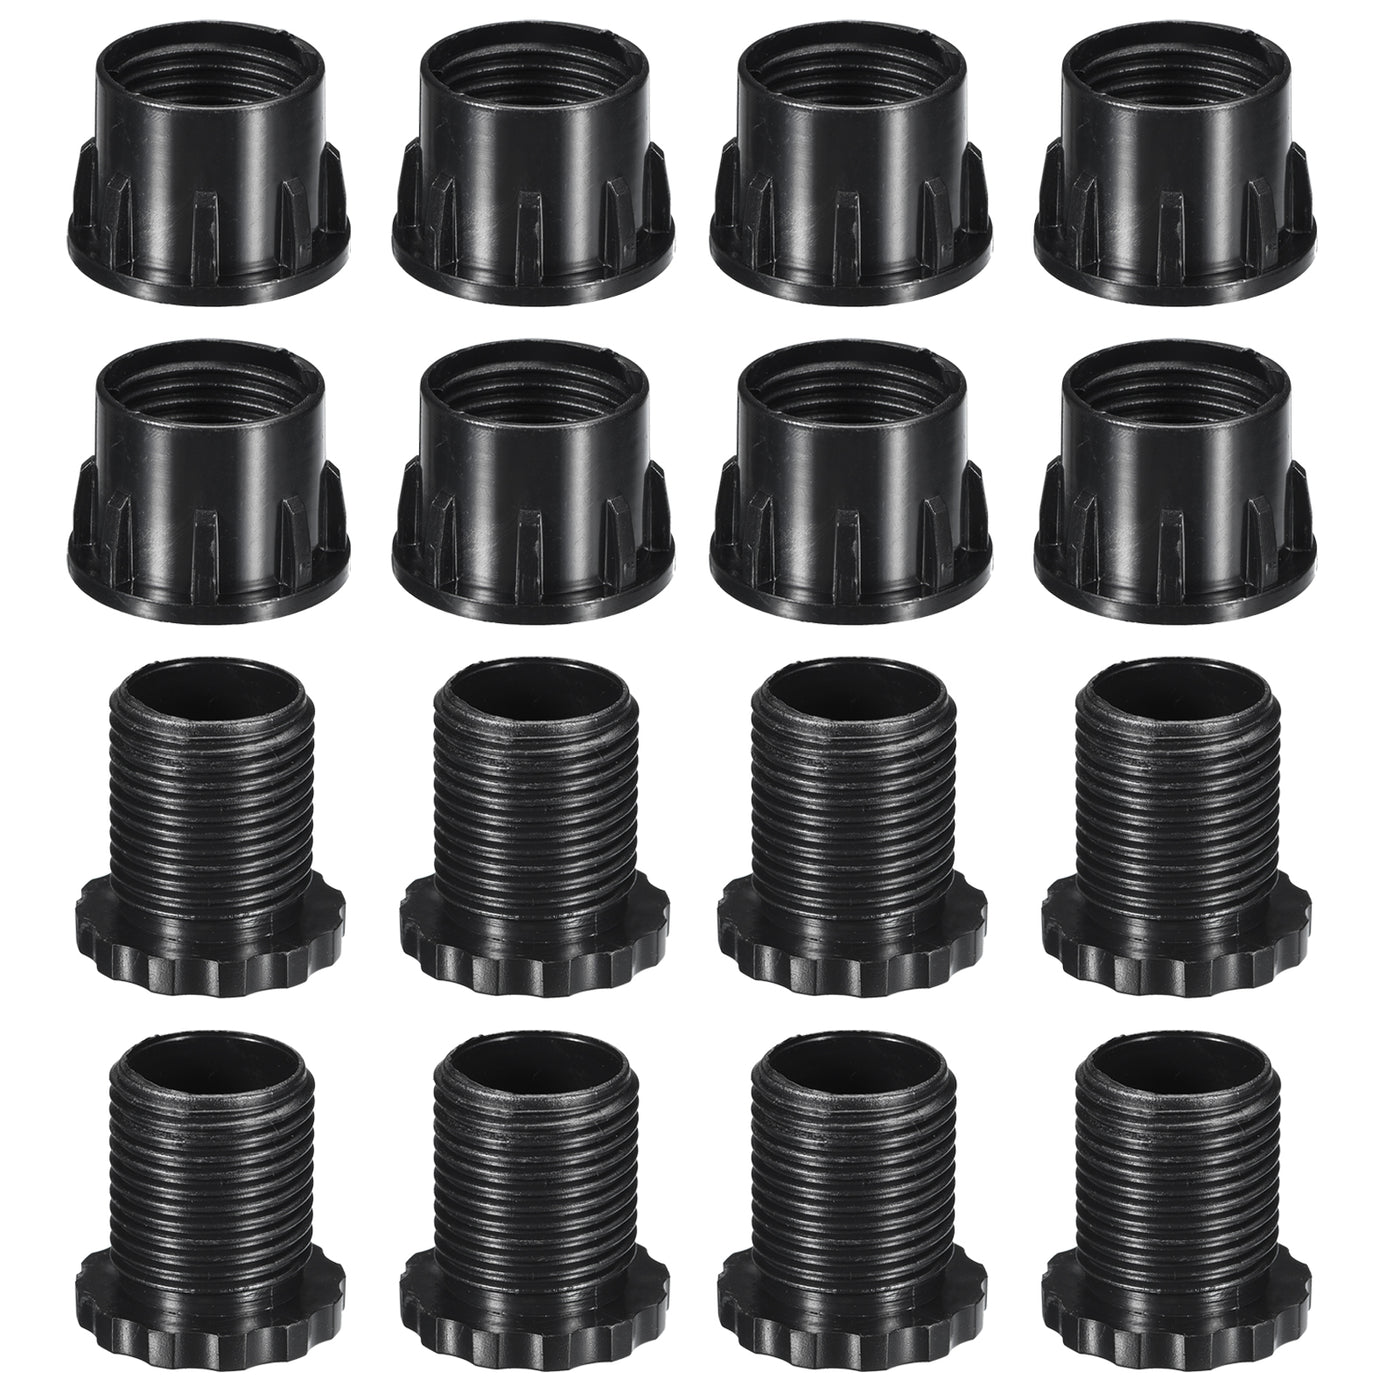 uxcell Uxcell 8Pcs Inserts for Round Tubes with Leveling Feet, for 40mm/1.57" Dia Round Tube